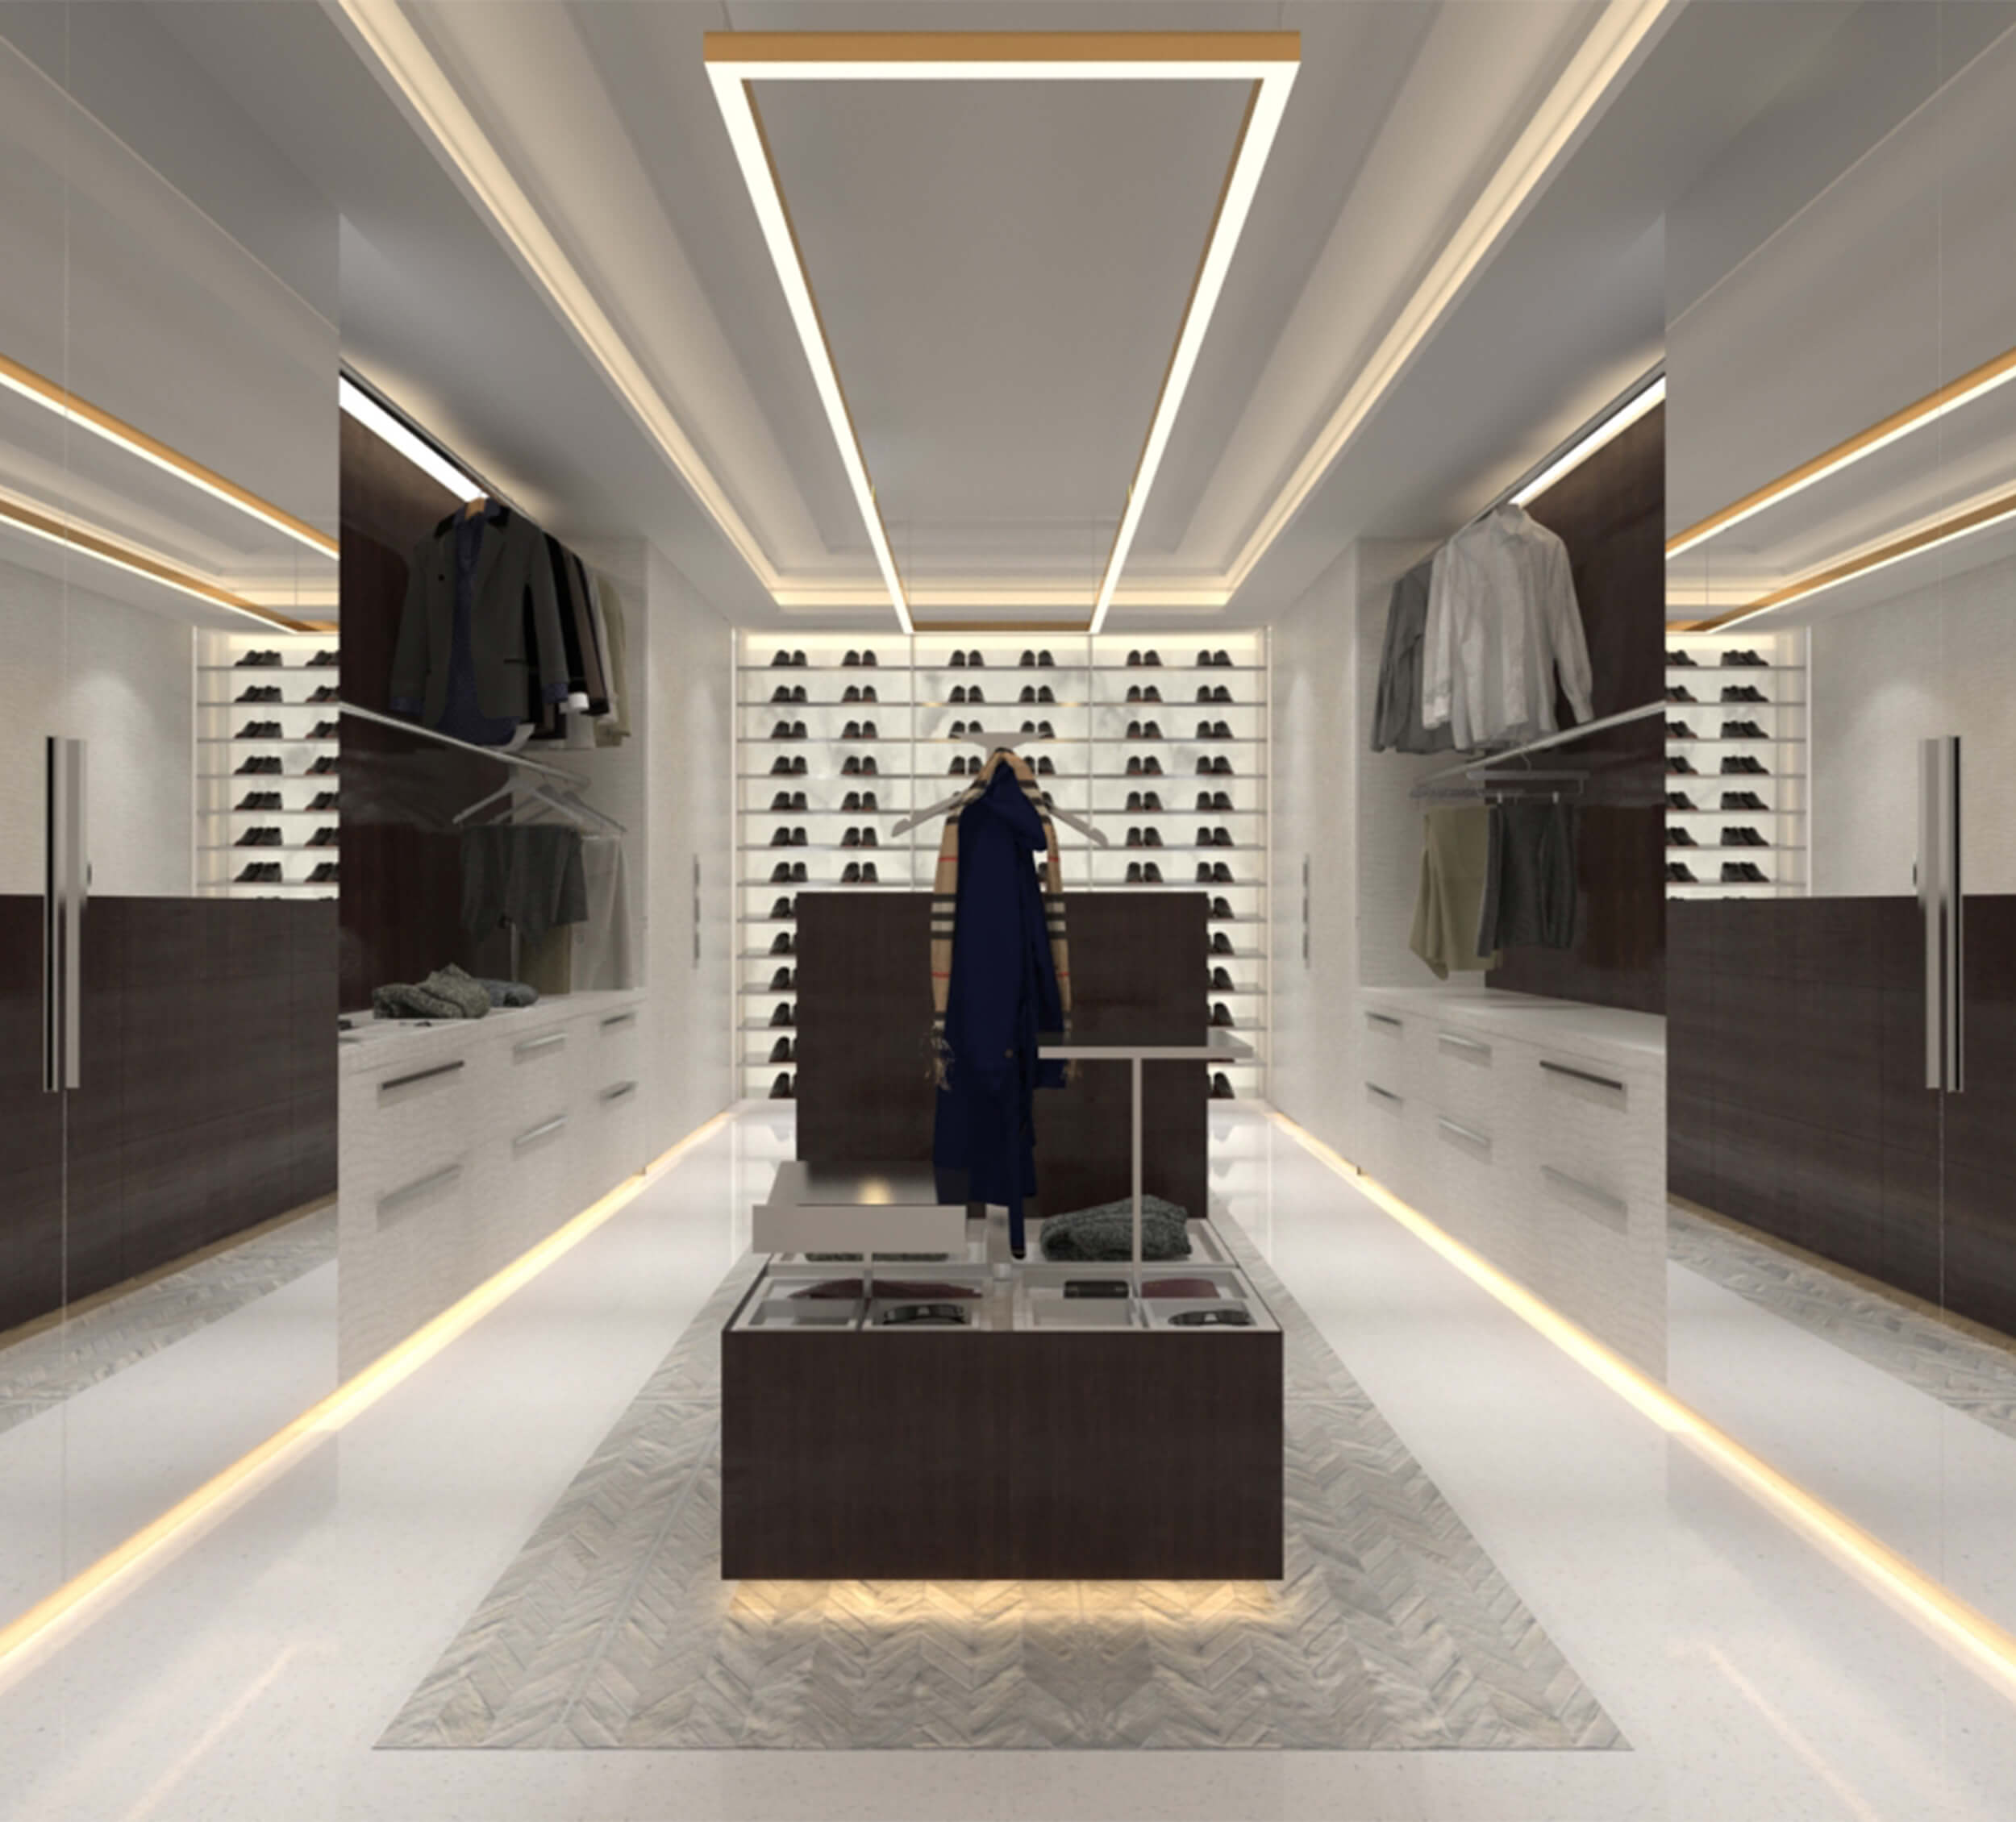 Master bedroom closet design by Britto Charette for the PH at Ritz Carlton Residences in Sunny Isles Beach